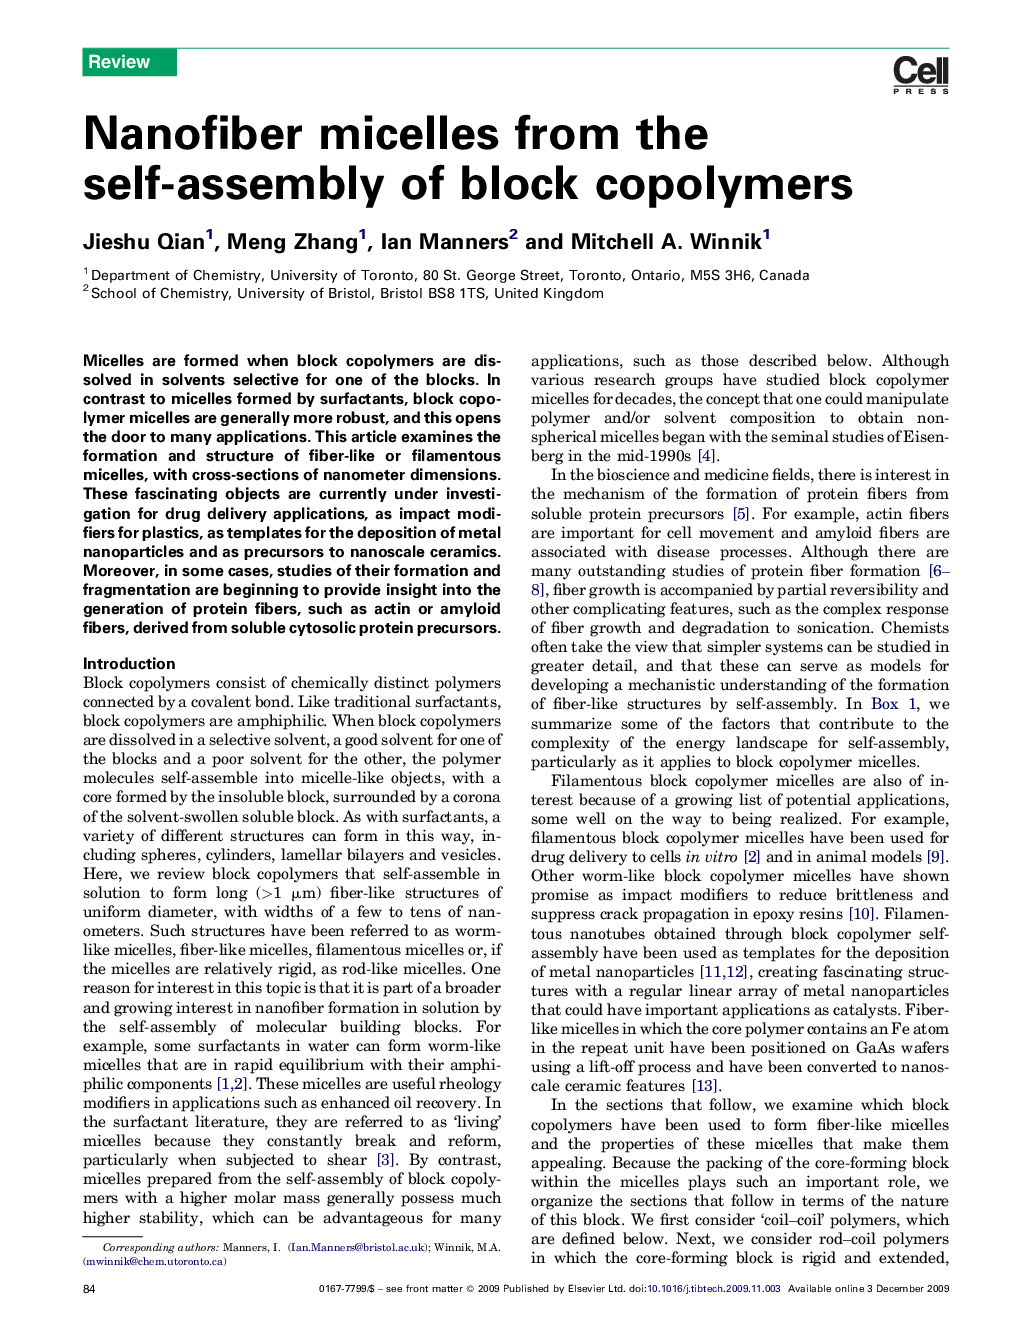 Nanofiber micelles from the self-assembly of block copolymers